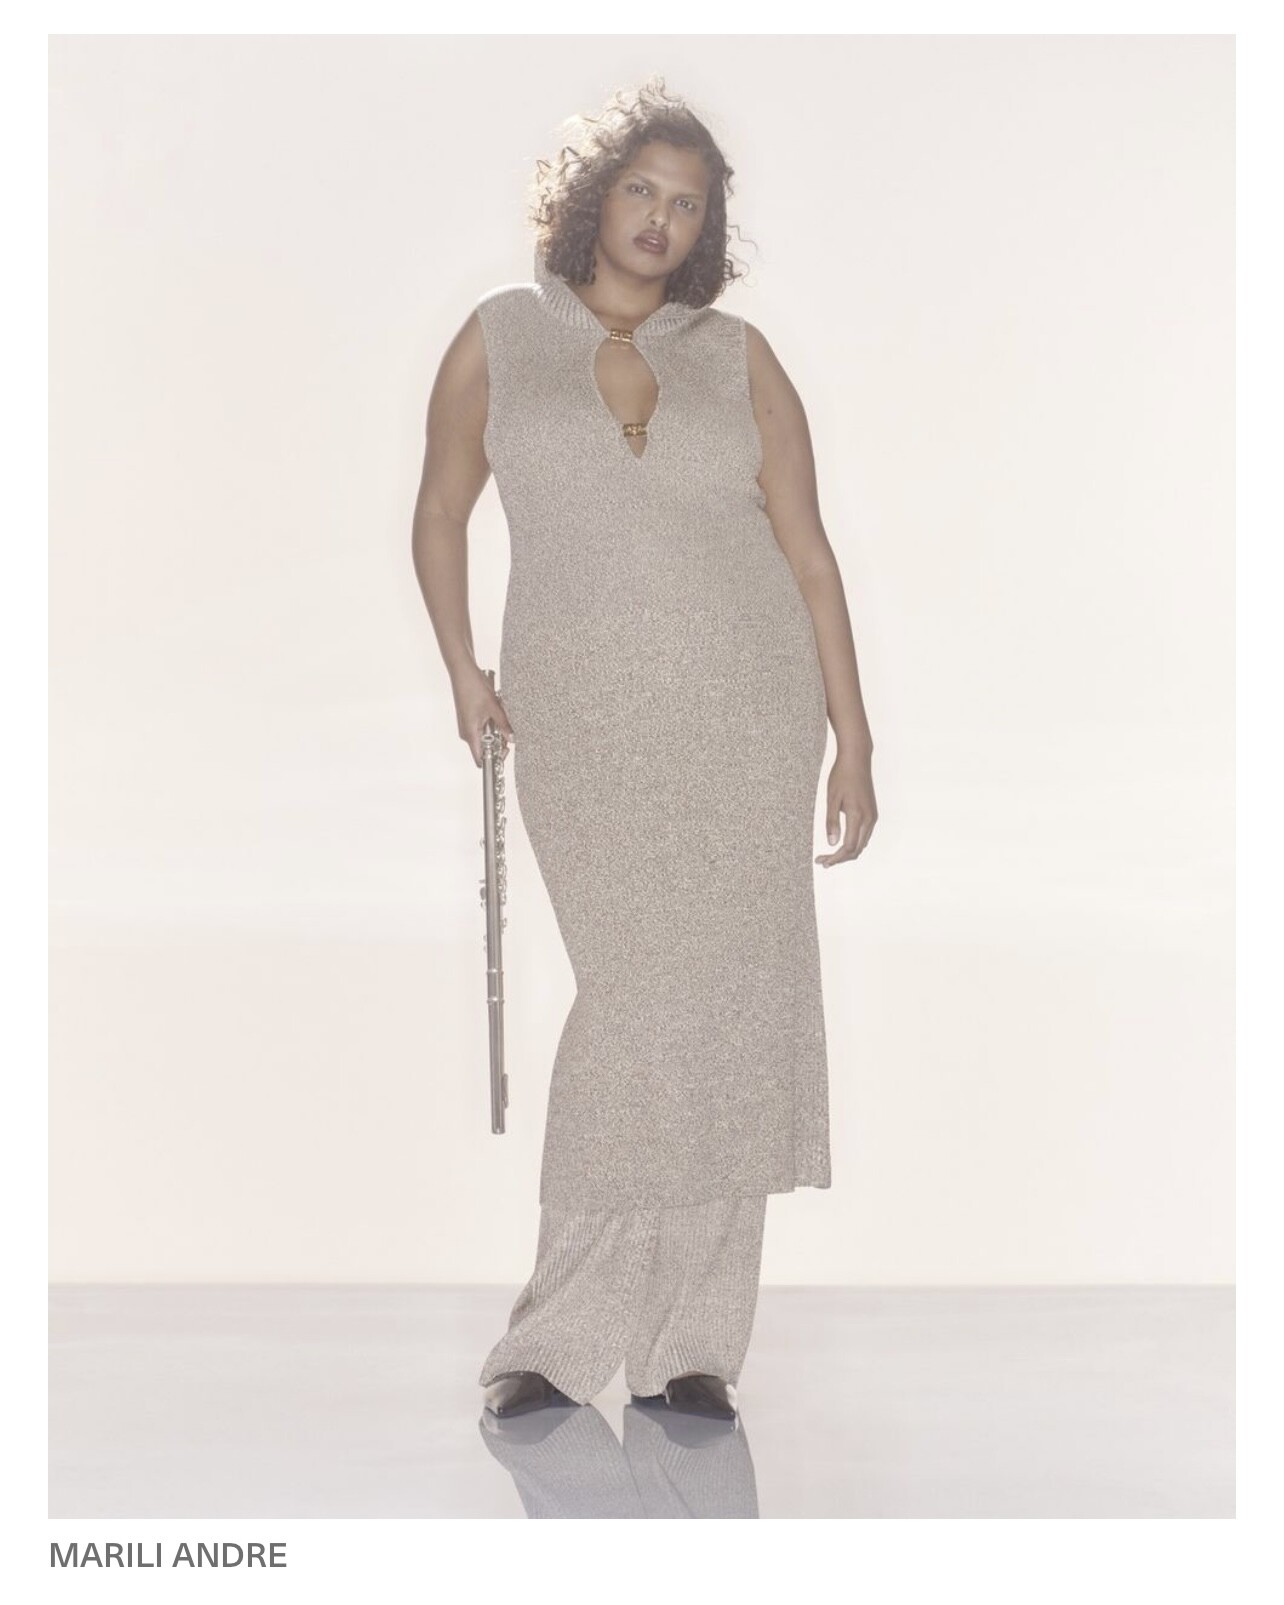 Paloma Elsesser Teams Up with Ganni for a Fashion-Forward, Size-Inclusive Collection